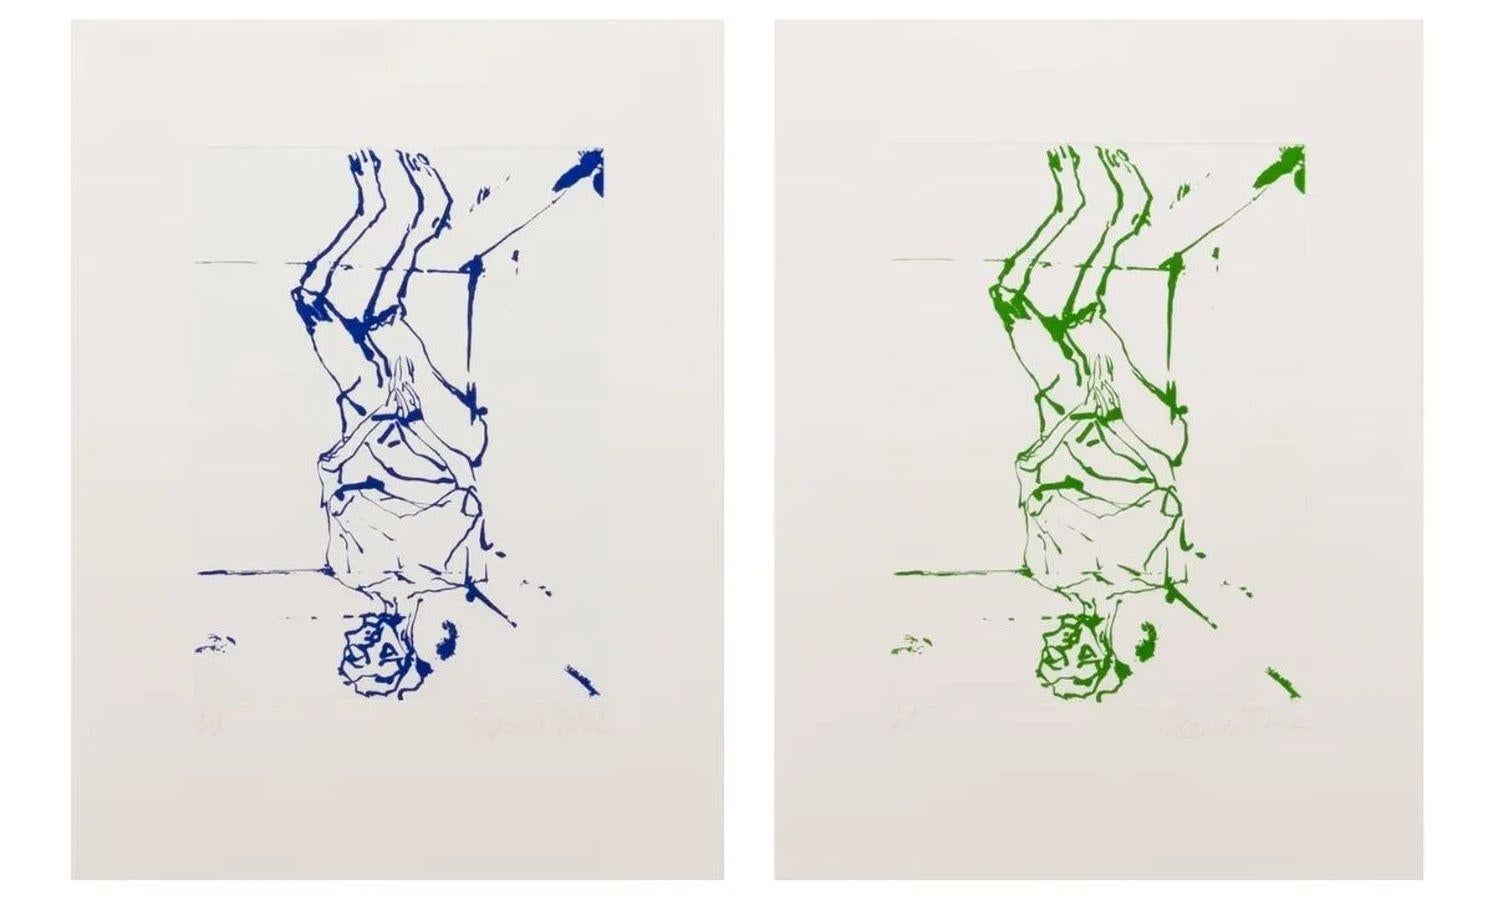 Serpentine - Blue and Green (Set of 2) 

By Georg Baselitz

Georg Baselitz is a German painter and sculptor celebrated for his distinctive style, characterized by upside-down and fragmented figures. A prominent figure in the Neo-Expressionist